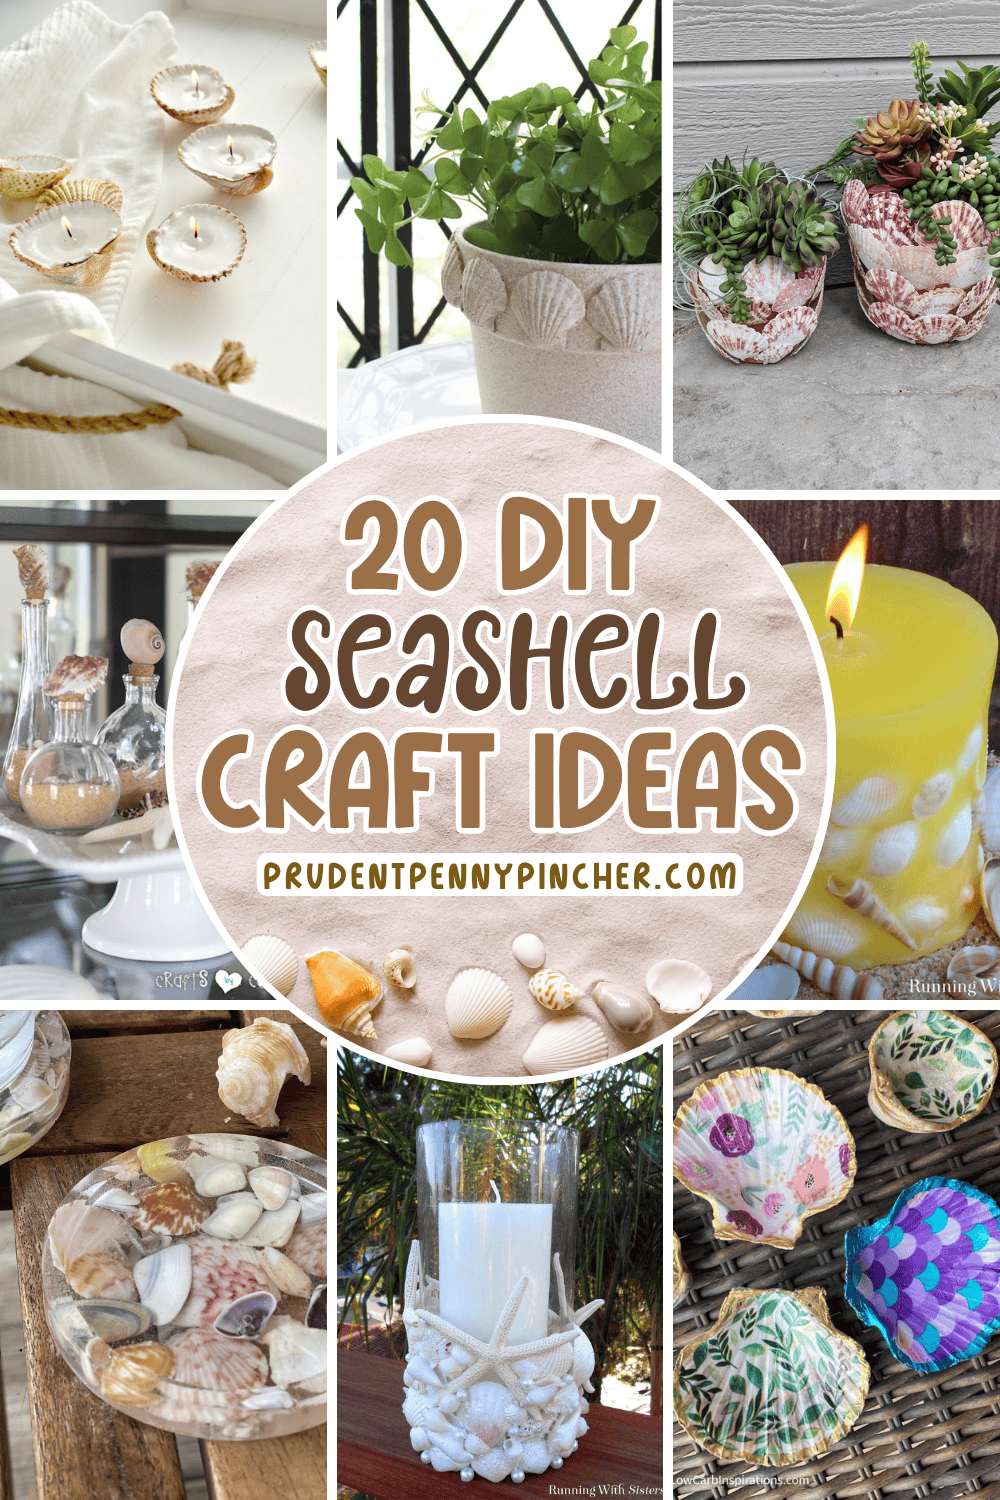 20 Easy DIY Seashell Crafts and Decor Ideas - Prudent Penny Pincher